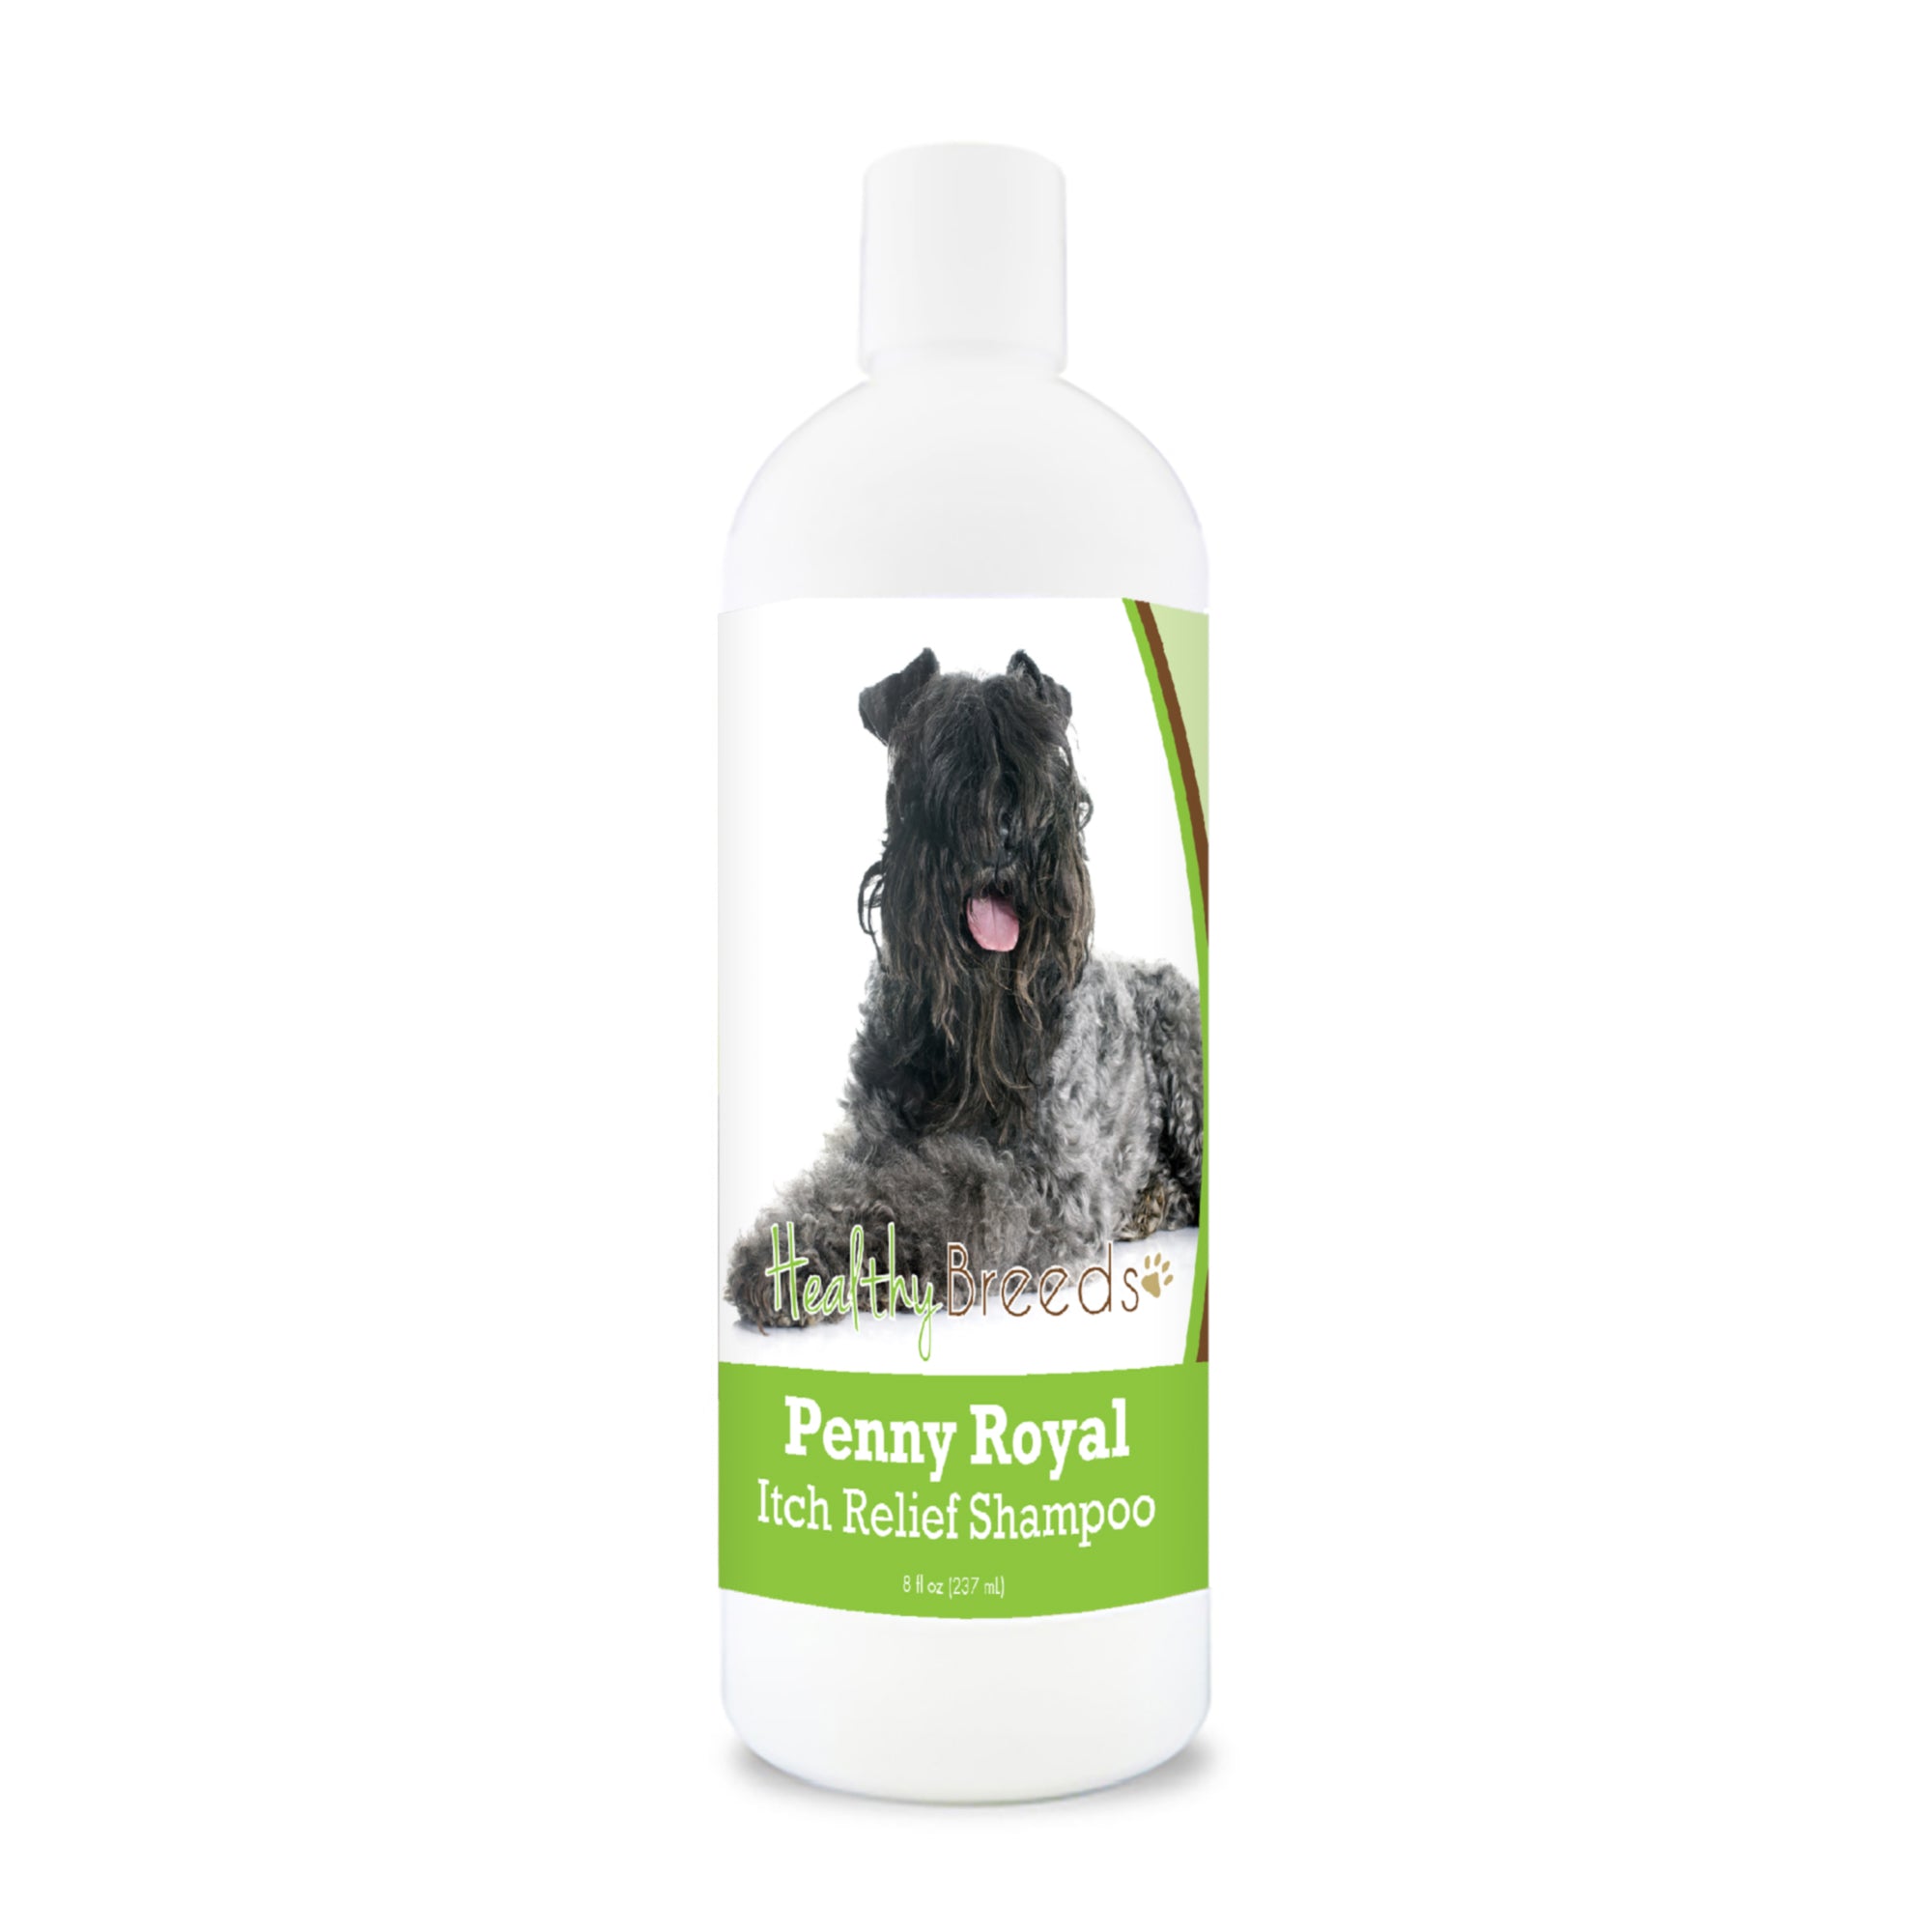 Kerry Blue Terrier Penny Royal Itch Relief Shampoo 8 oz